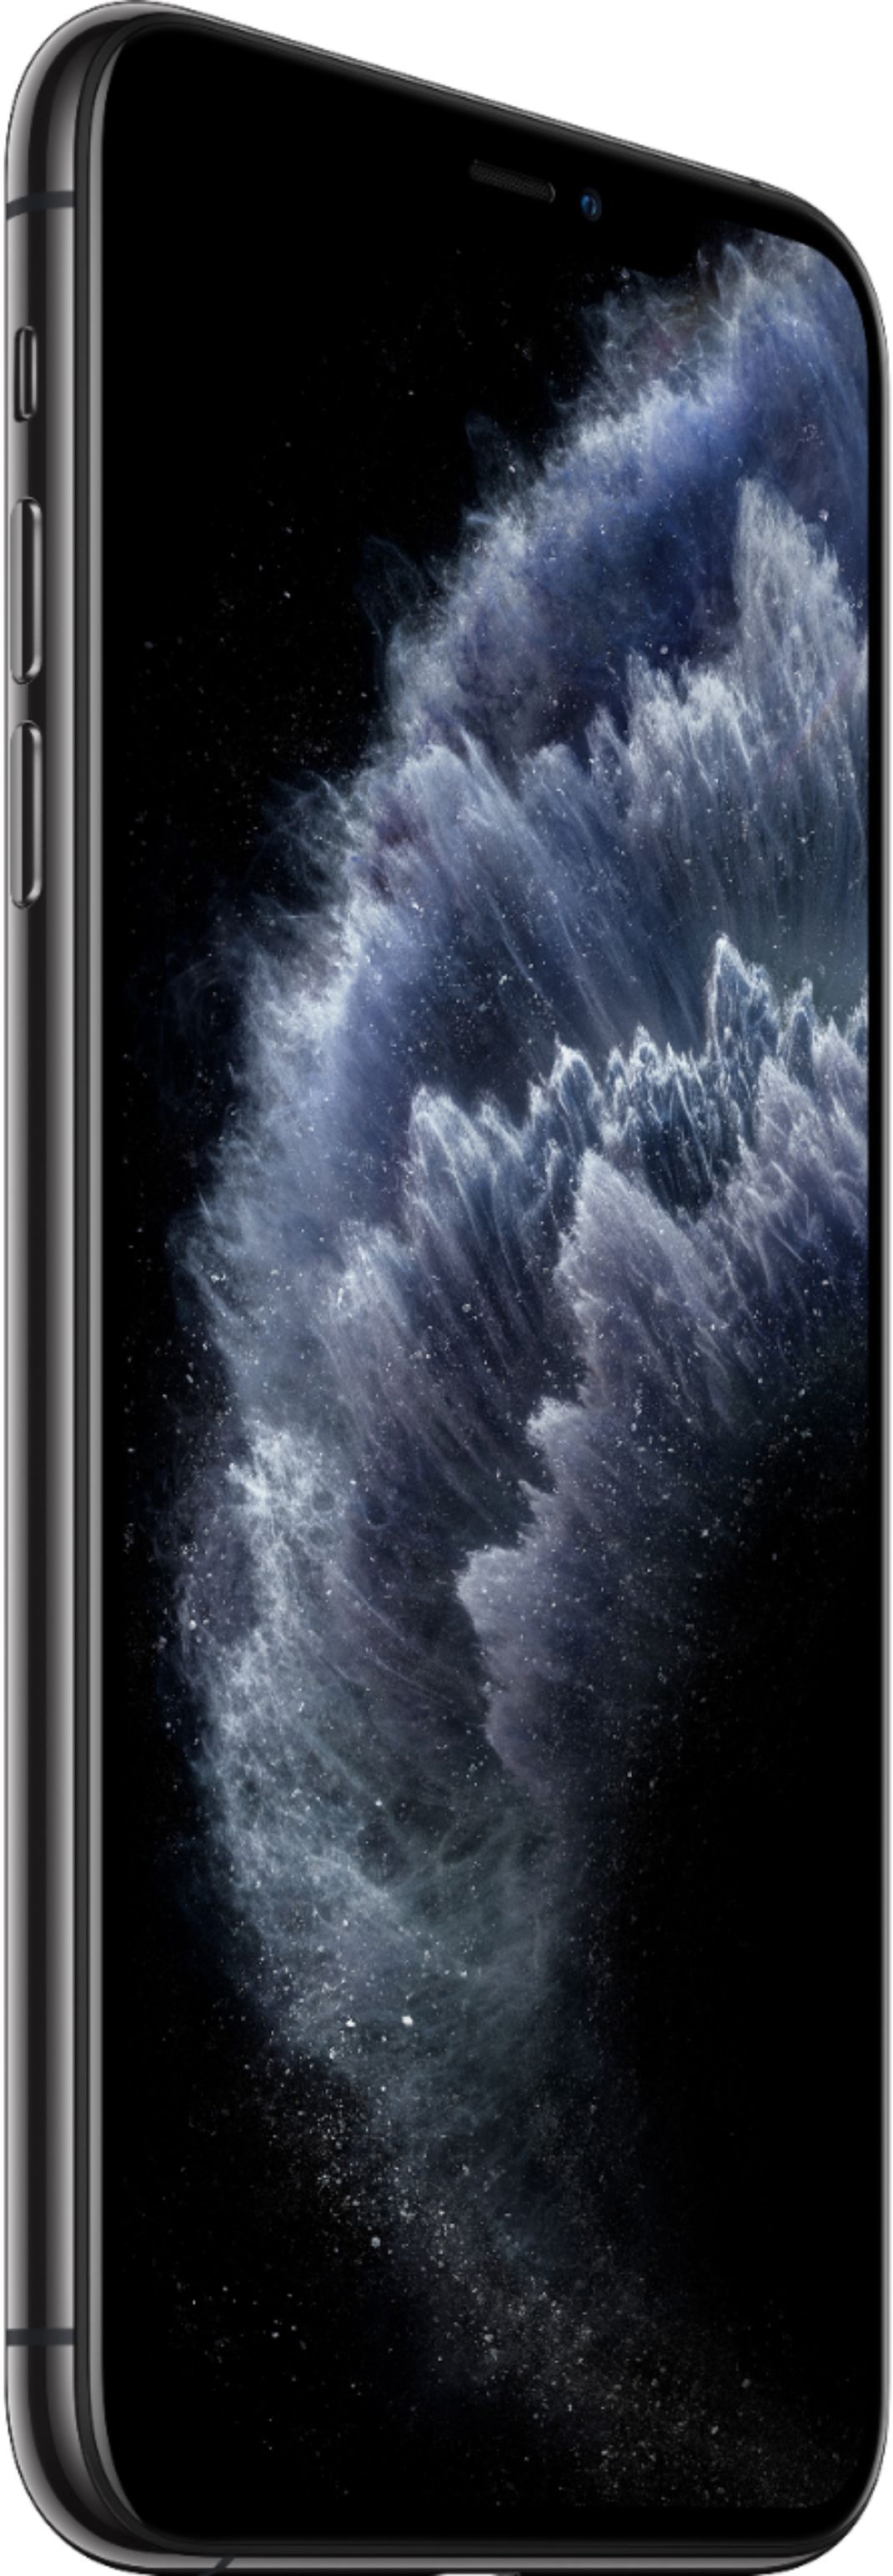 Best Buy: Apple iPhone 11 Pro Max 256GB Space Gray (AT&T) MWH42LL/A